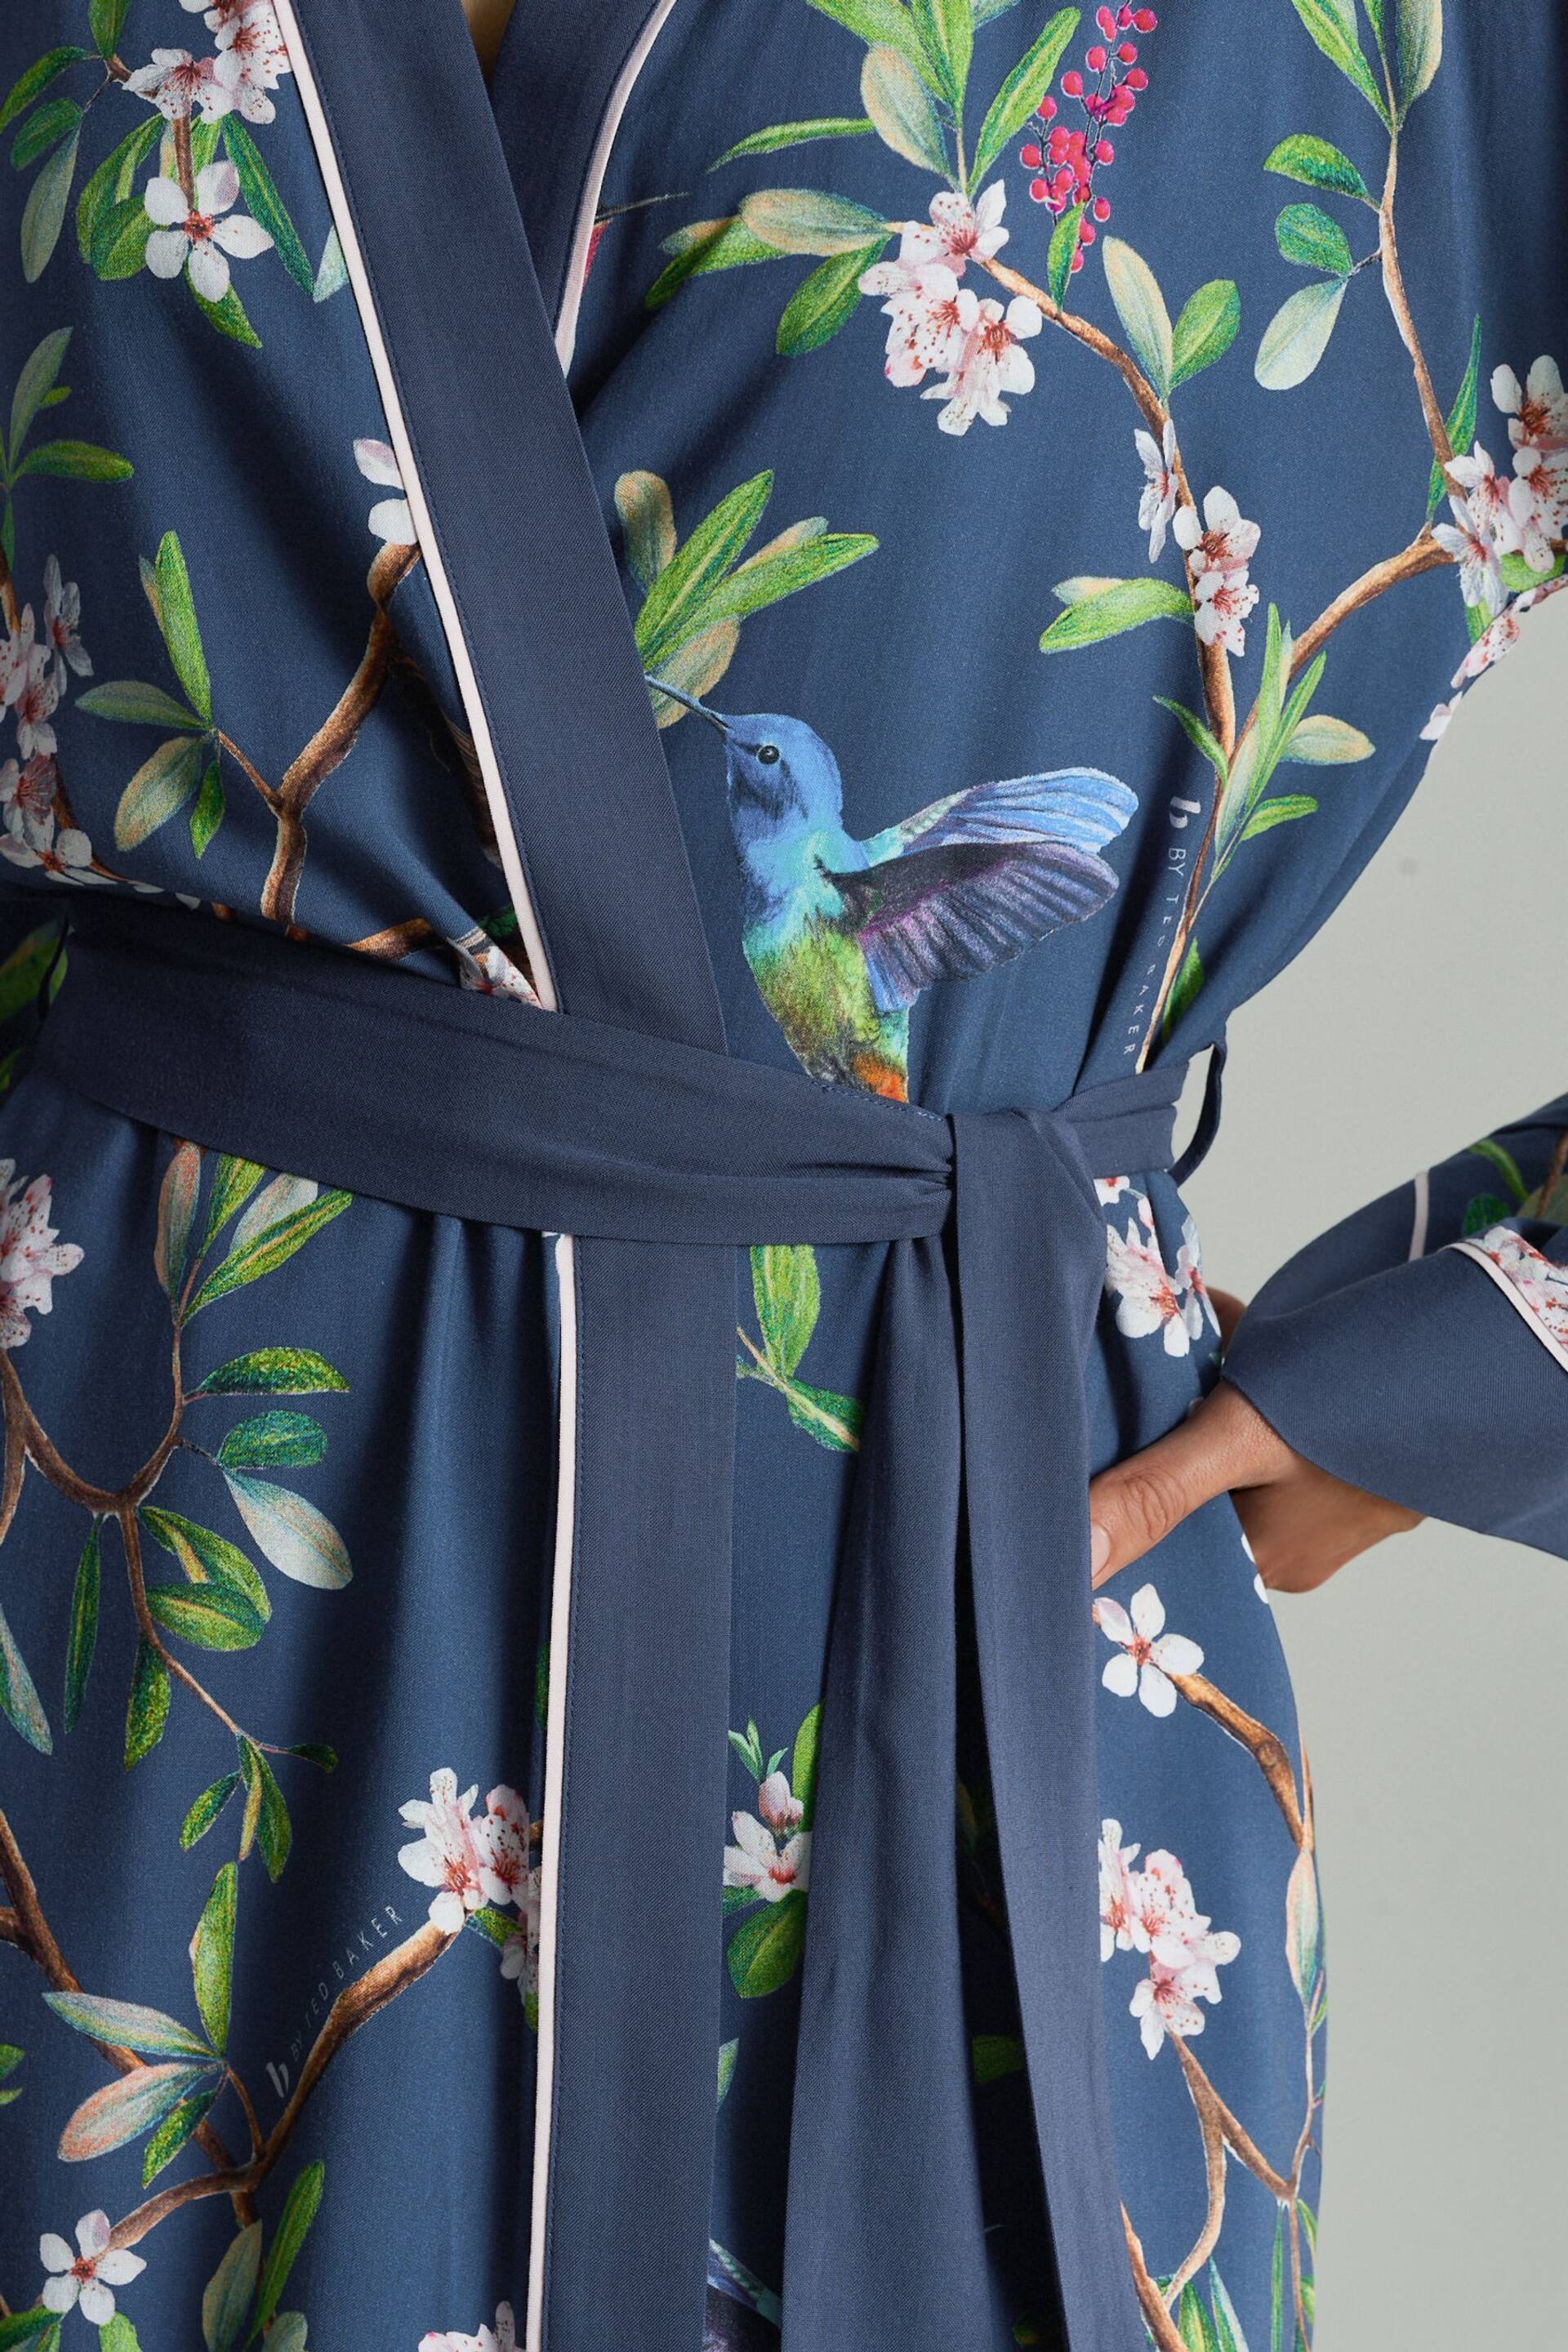 B by Ted Baker Charcoal Navy Bird Viscose Robe - Image 11 of 12